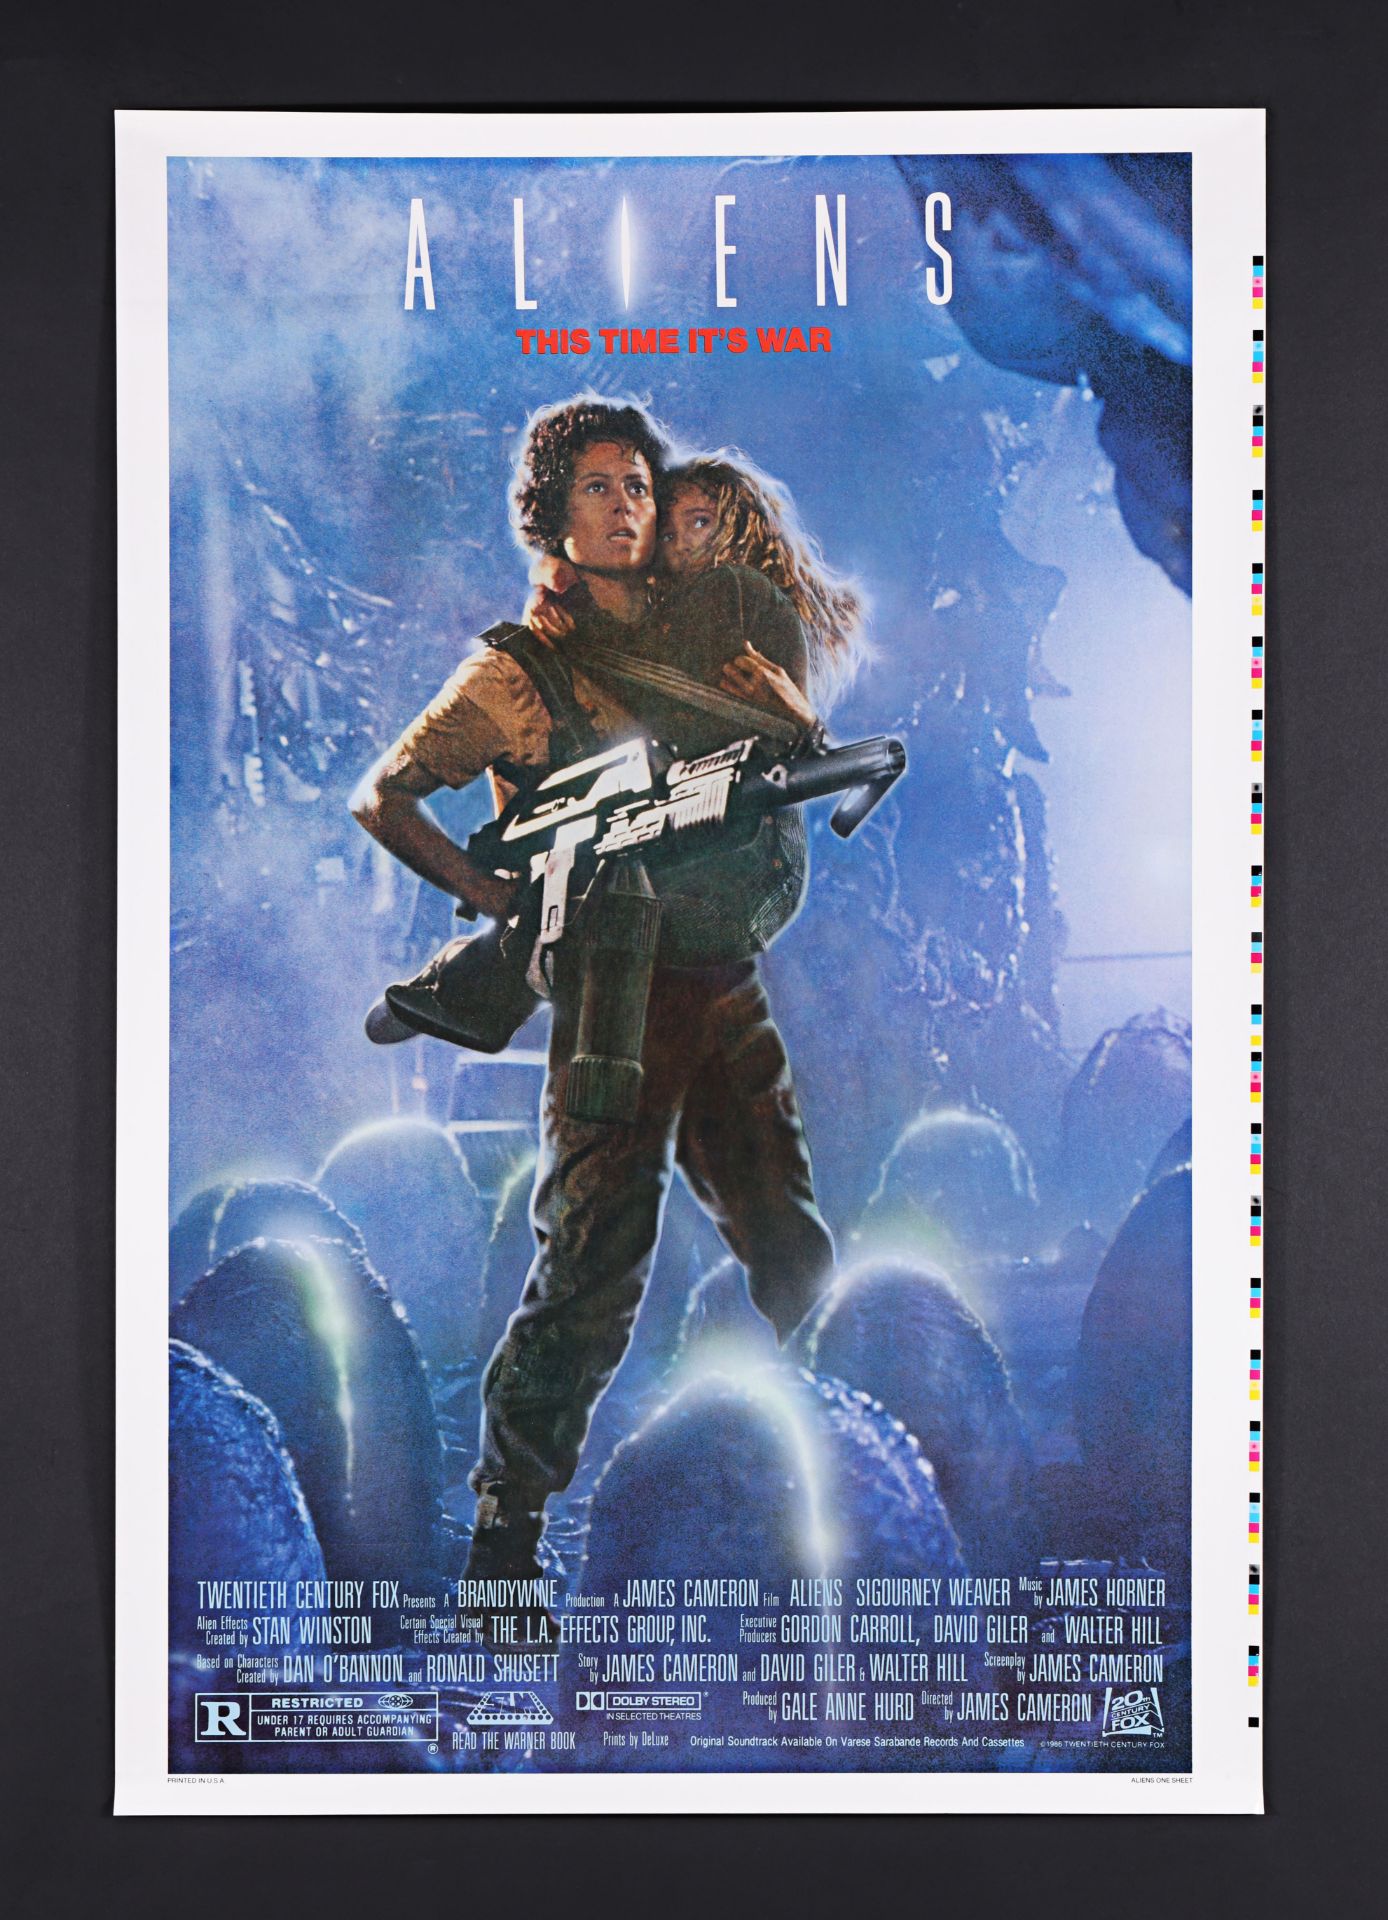 ALIENS (1986) - David Frangioni Collection: Printer's Test Proof US One-Sheet, 1986